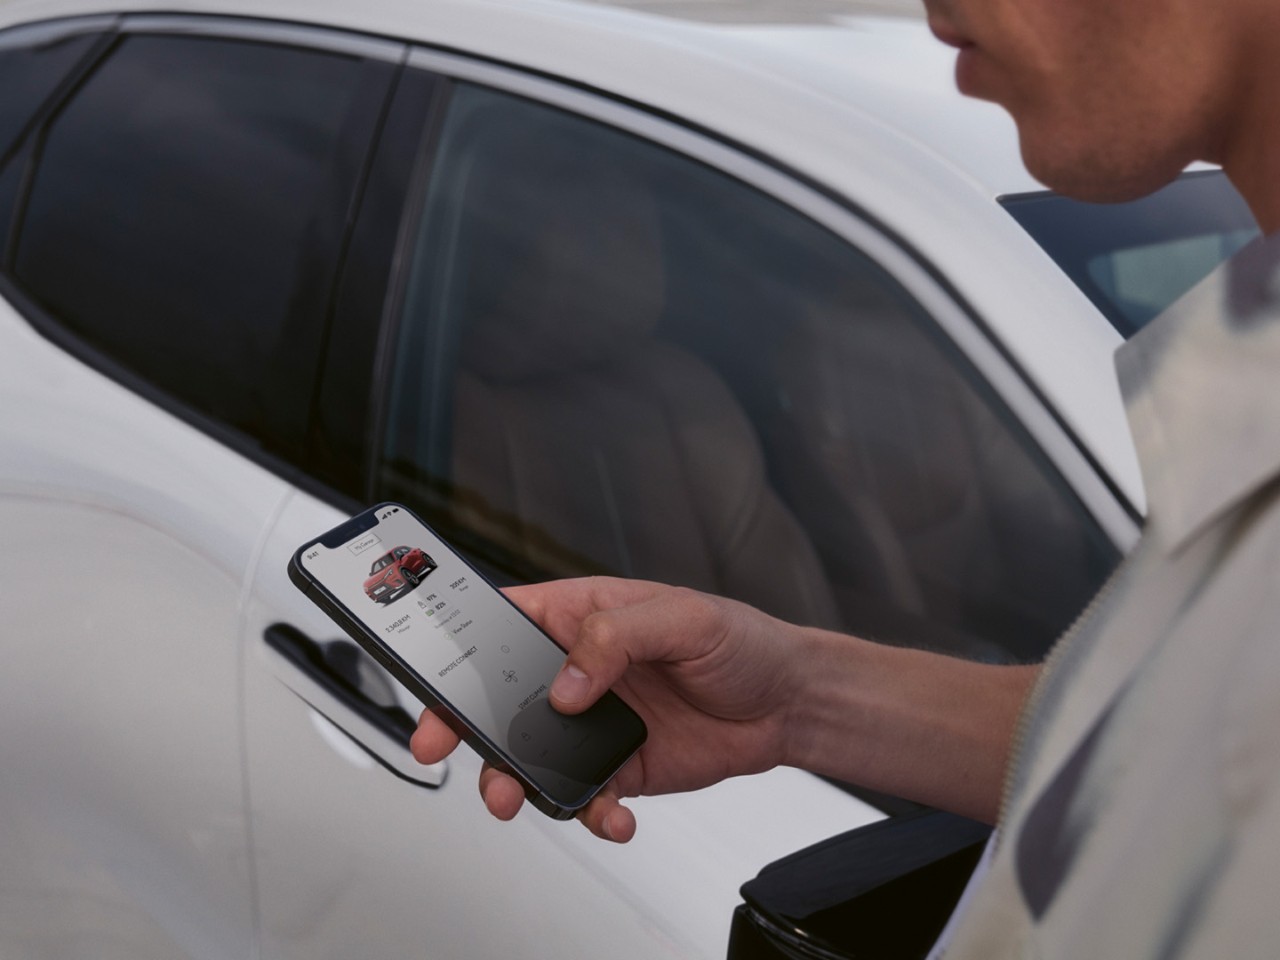 A person using a mobile phone to access the Lexus Link app